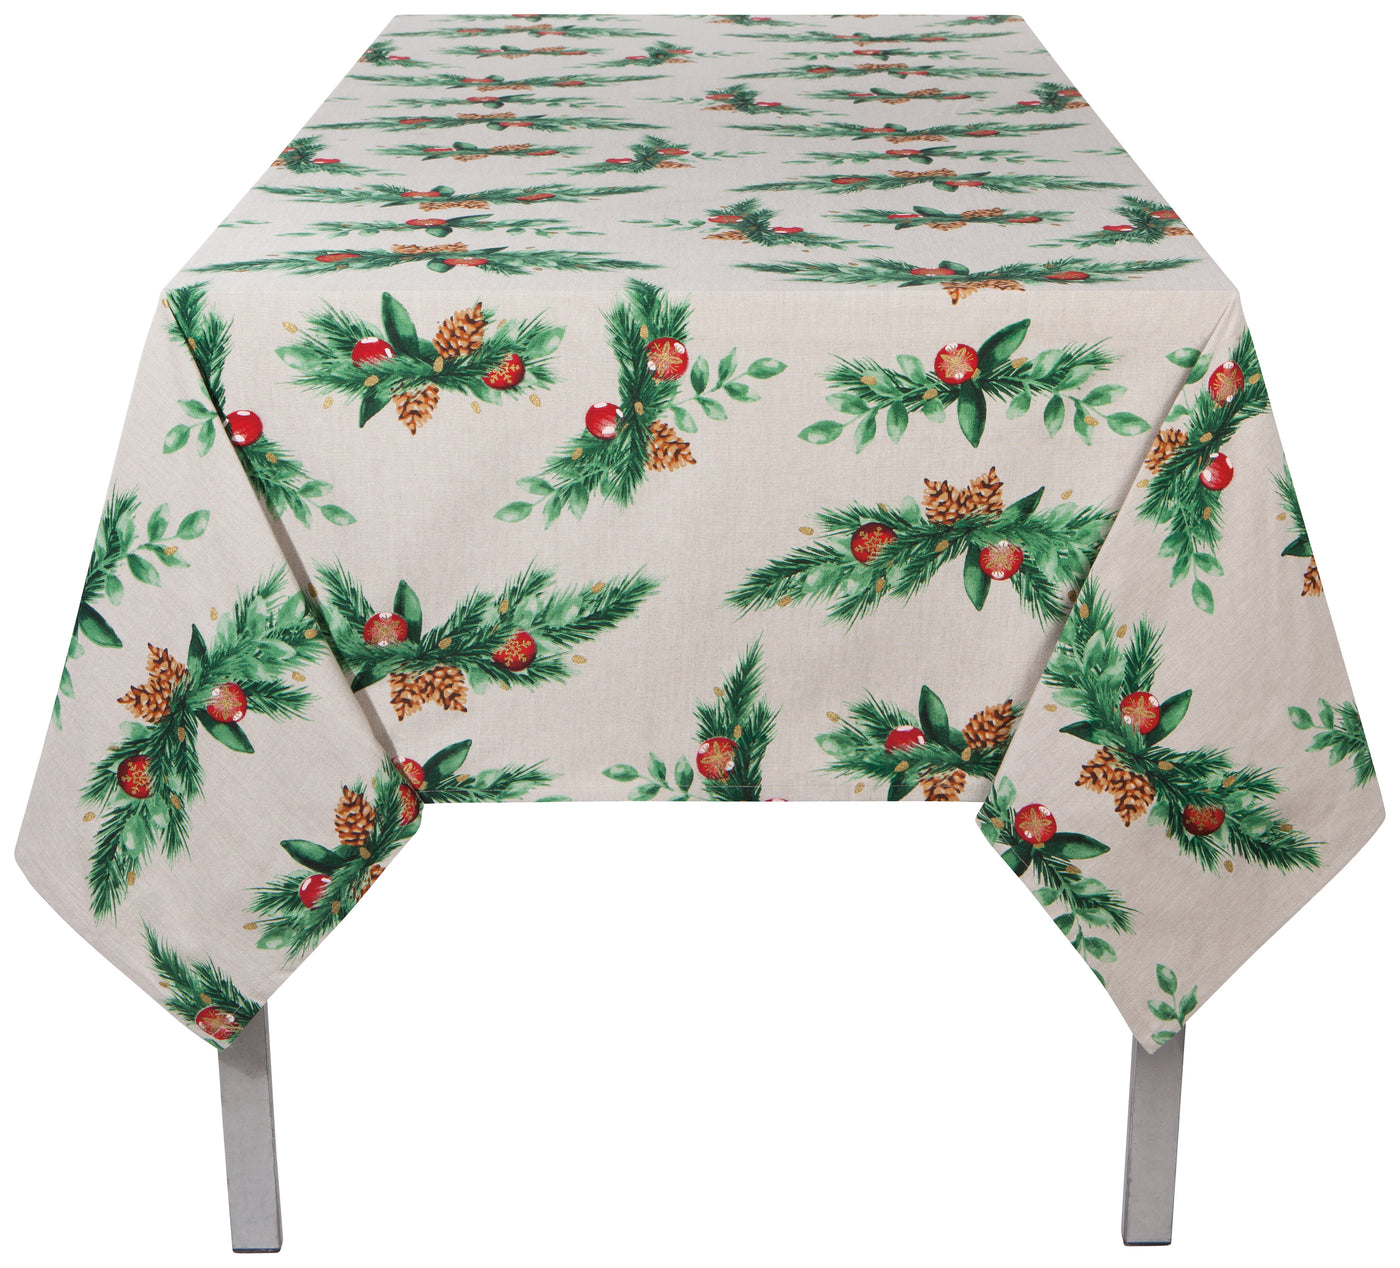 Danica Now Designs Tablecloth 60 x 120 Inch, Deck the Halls – Kitchen ...